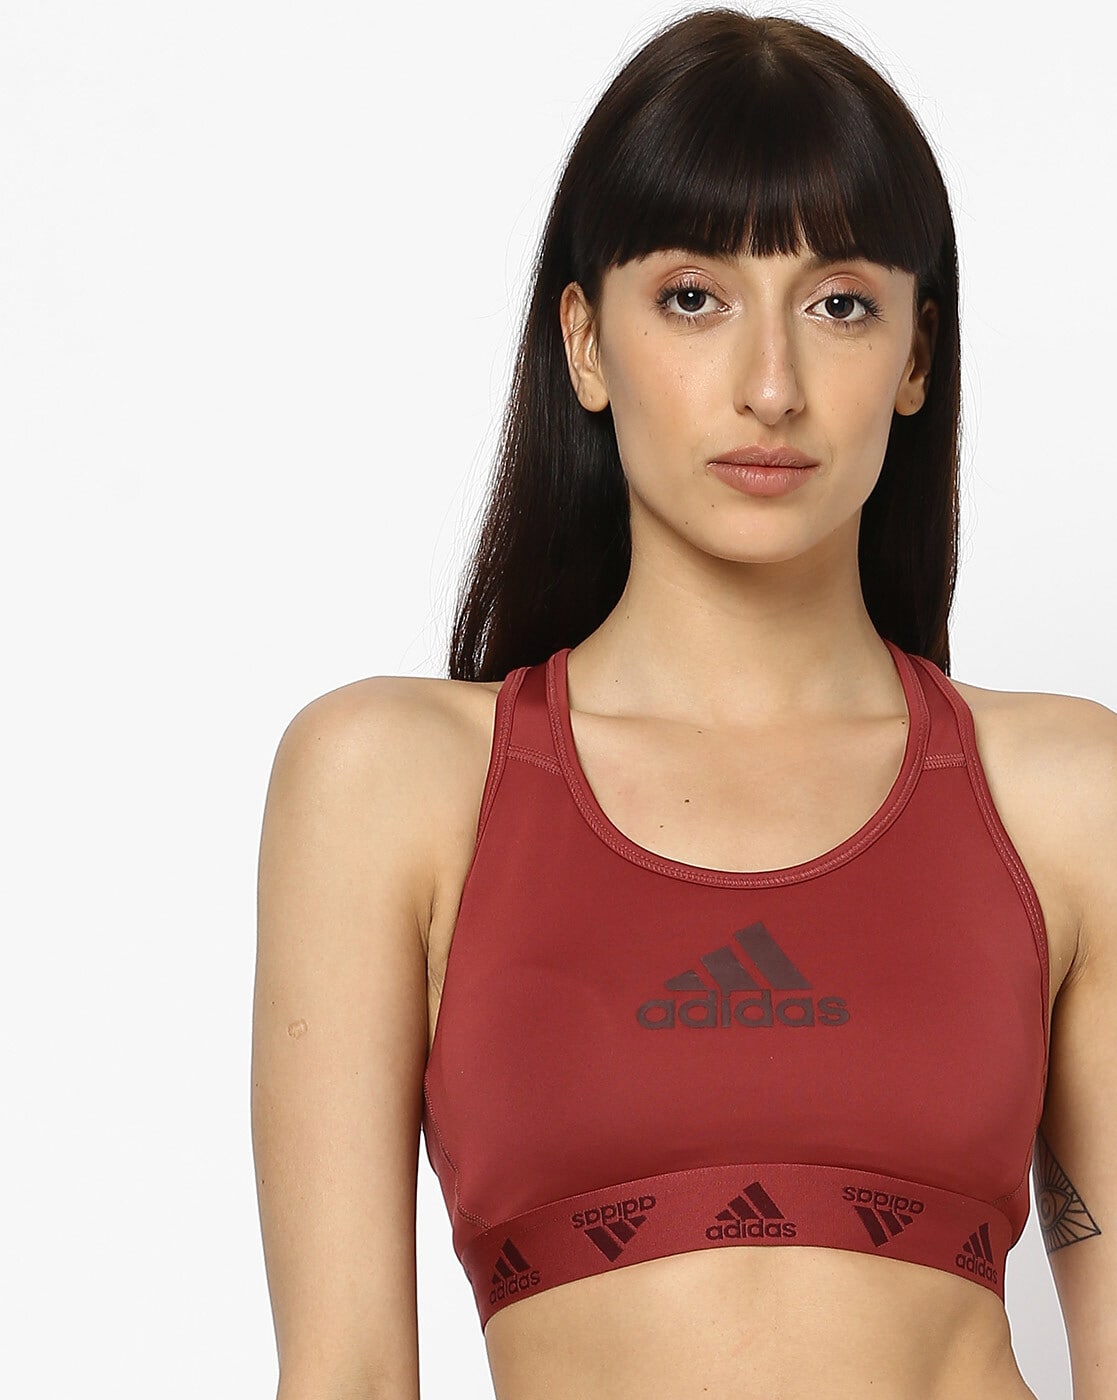 Adidas Sports Bras Are Up to 40% Off at